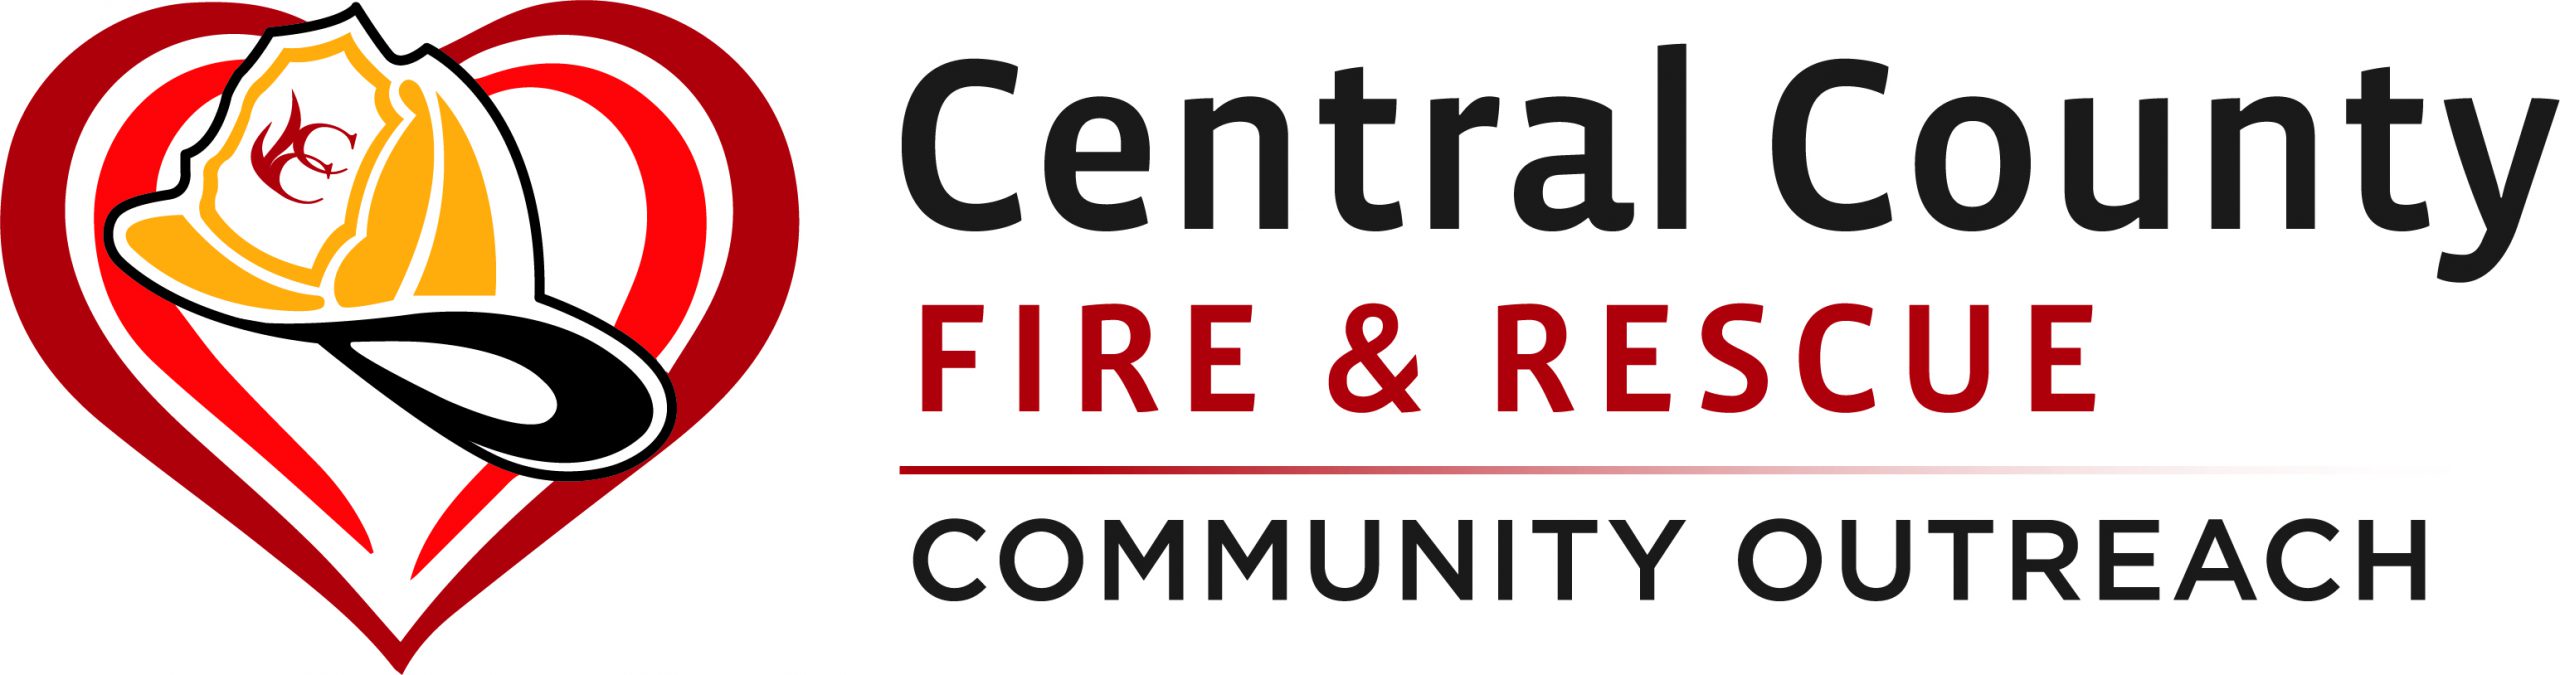 Central County Fire Rescue Community Outreach